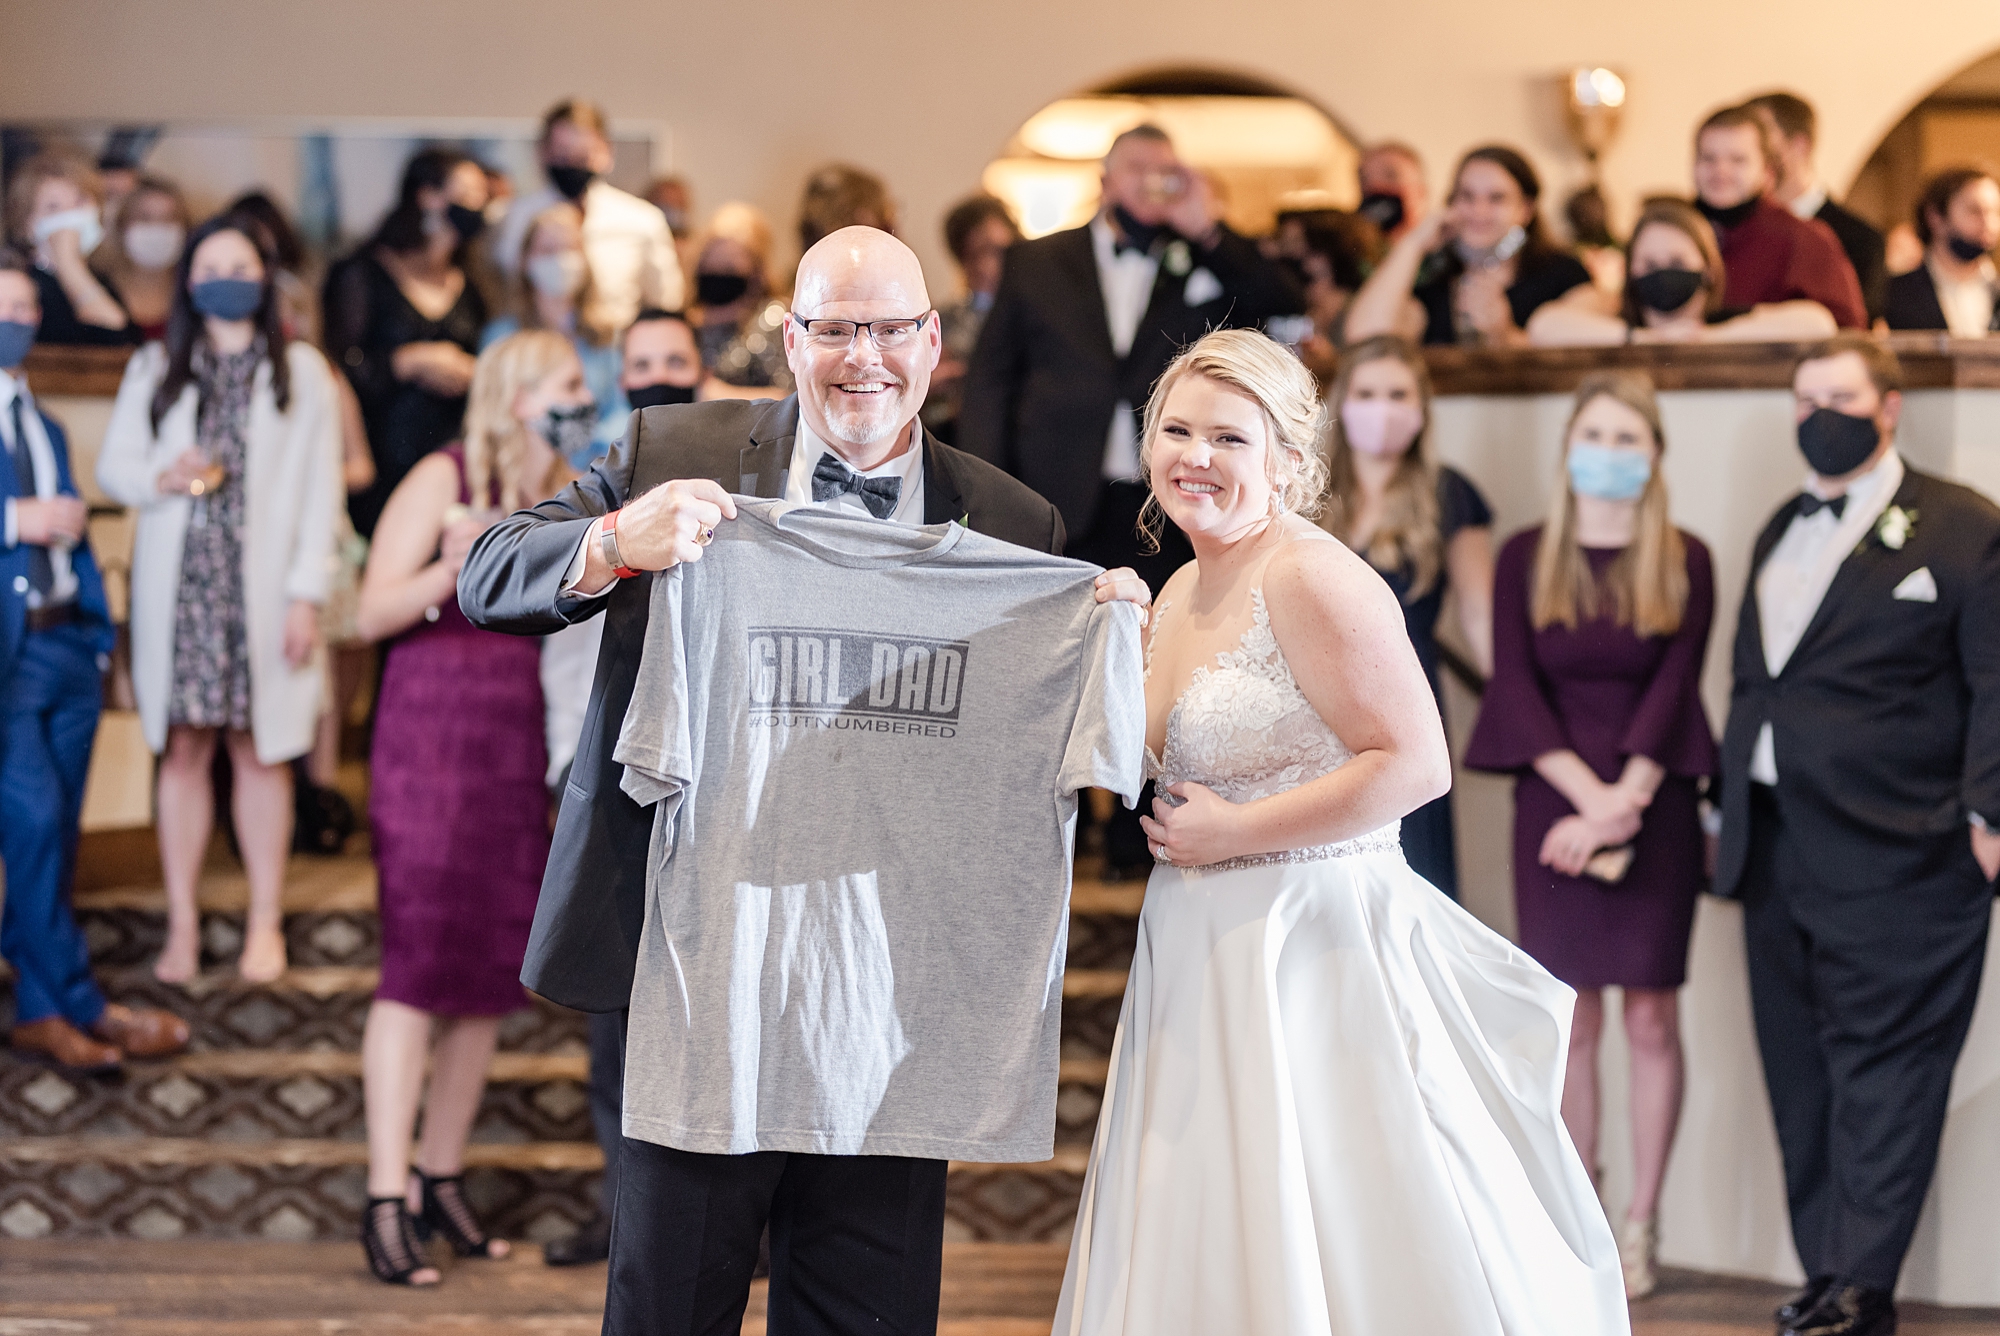 bride gifts dad a t-shirt during wedding reception